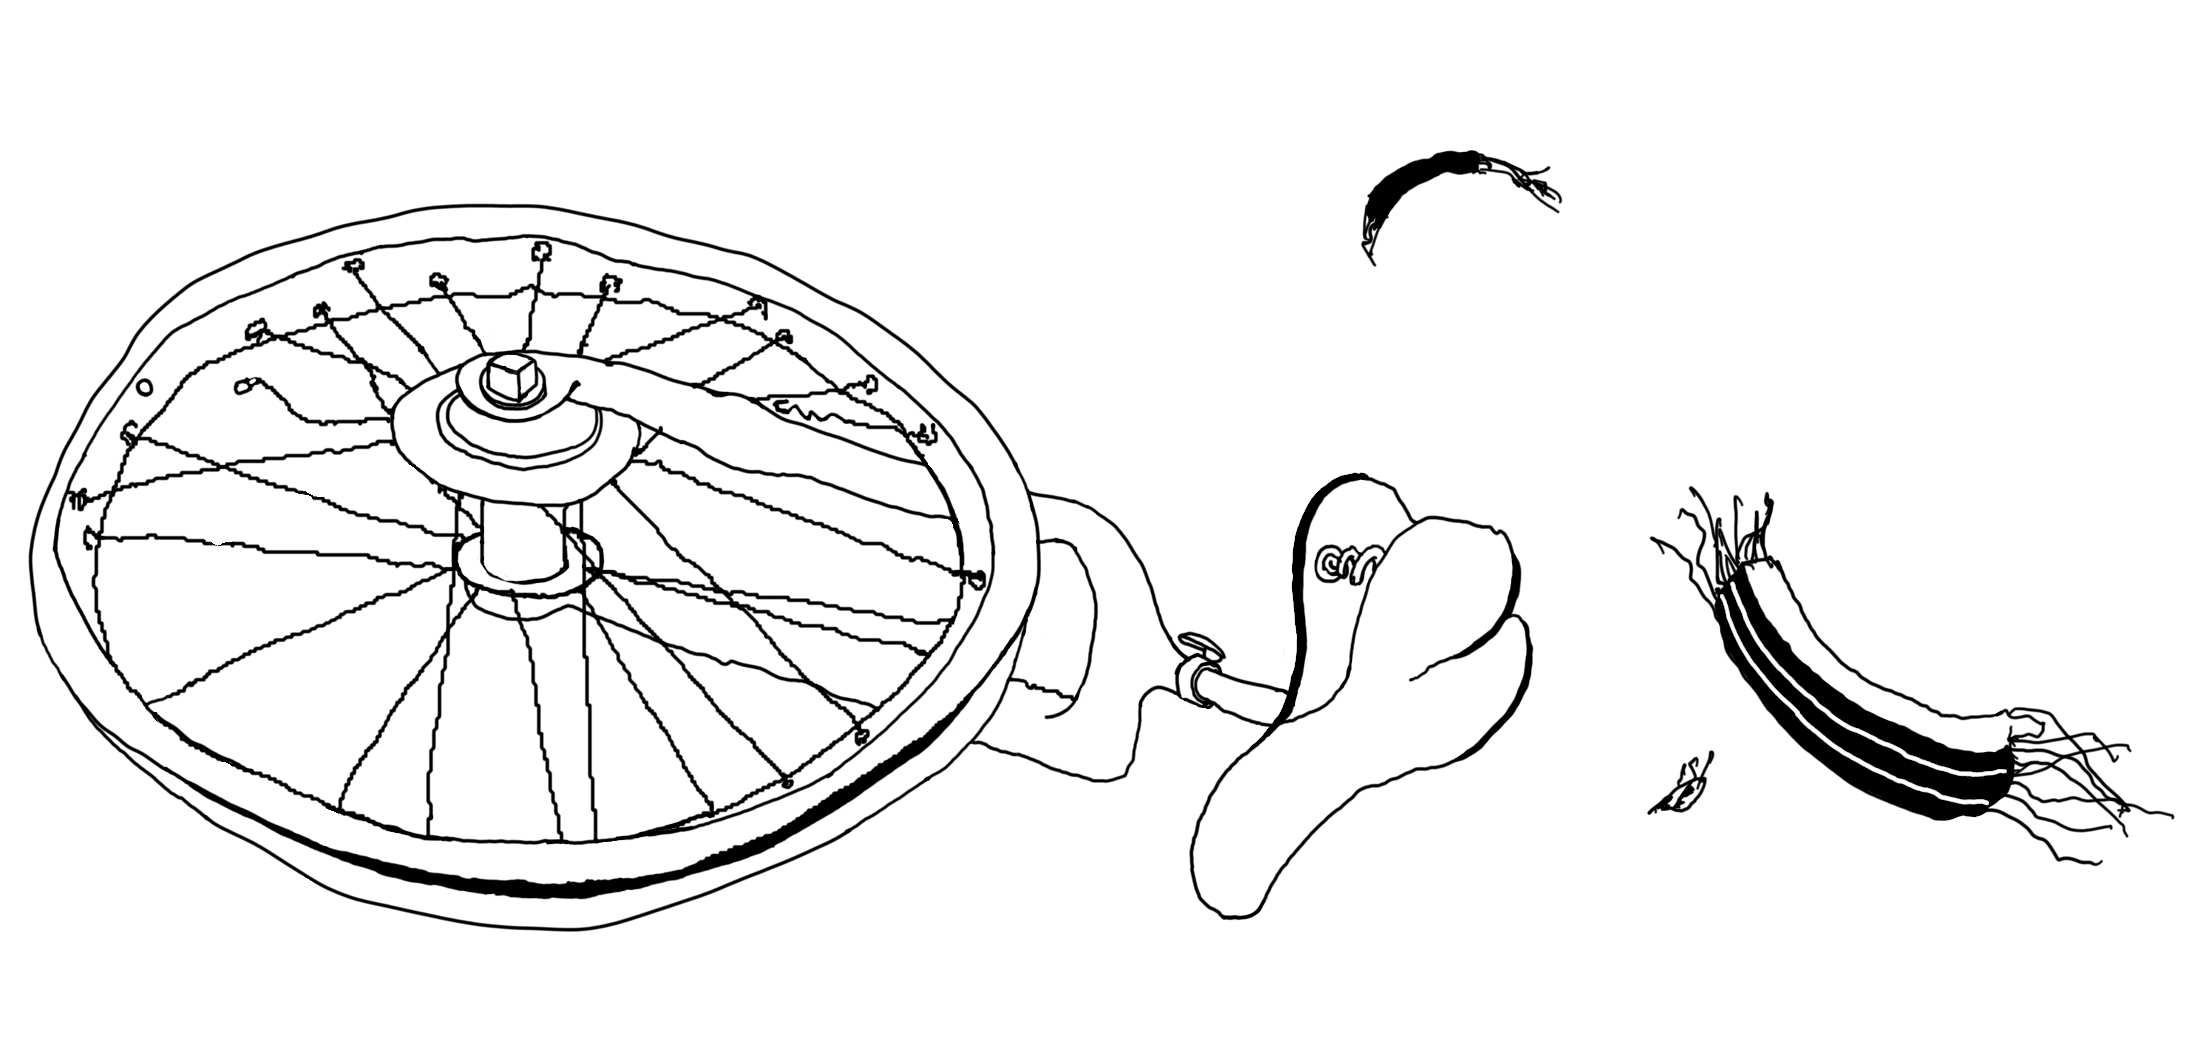 Image of an unicycle